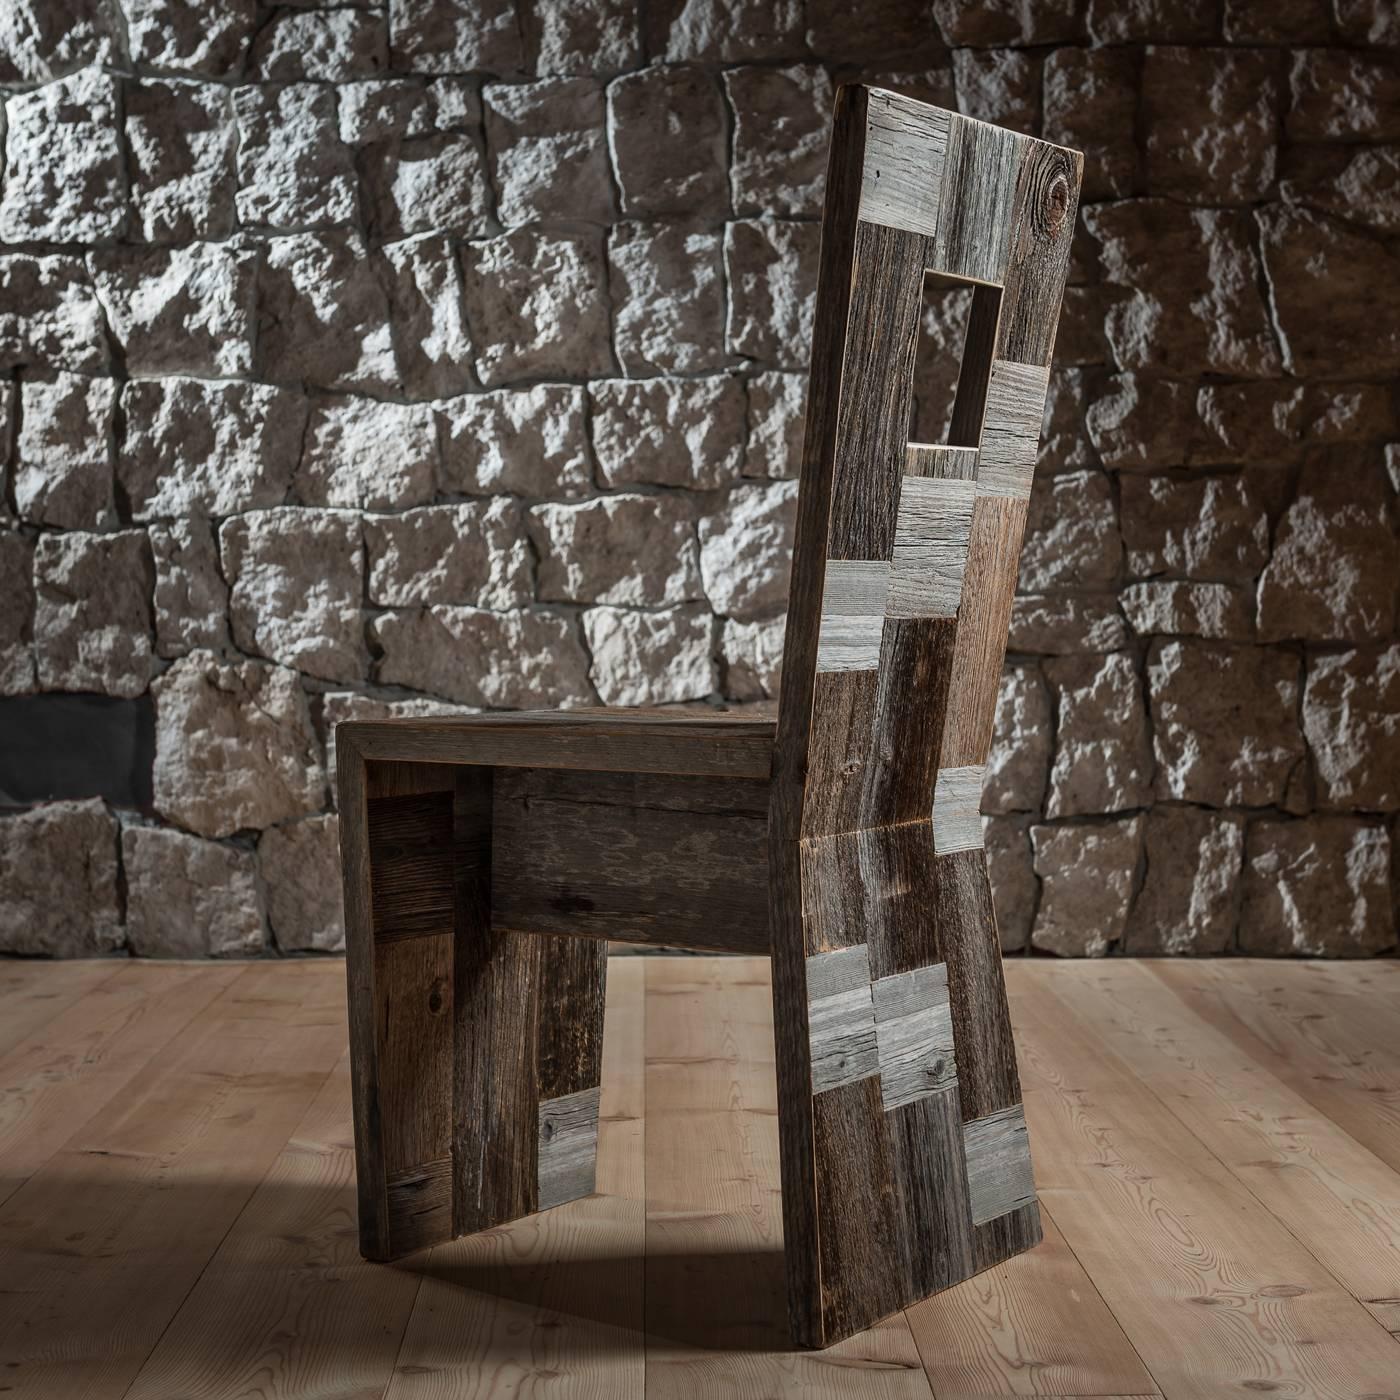 Inspired by the Tofana di Rozes mountain of the Dolomites, located west of the resort of Cortina d'Ampezzo, famous for its giant three-edged pyramid shape and its vertical south face, this massive and angular chair is made of squares of antique,